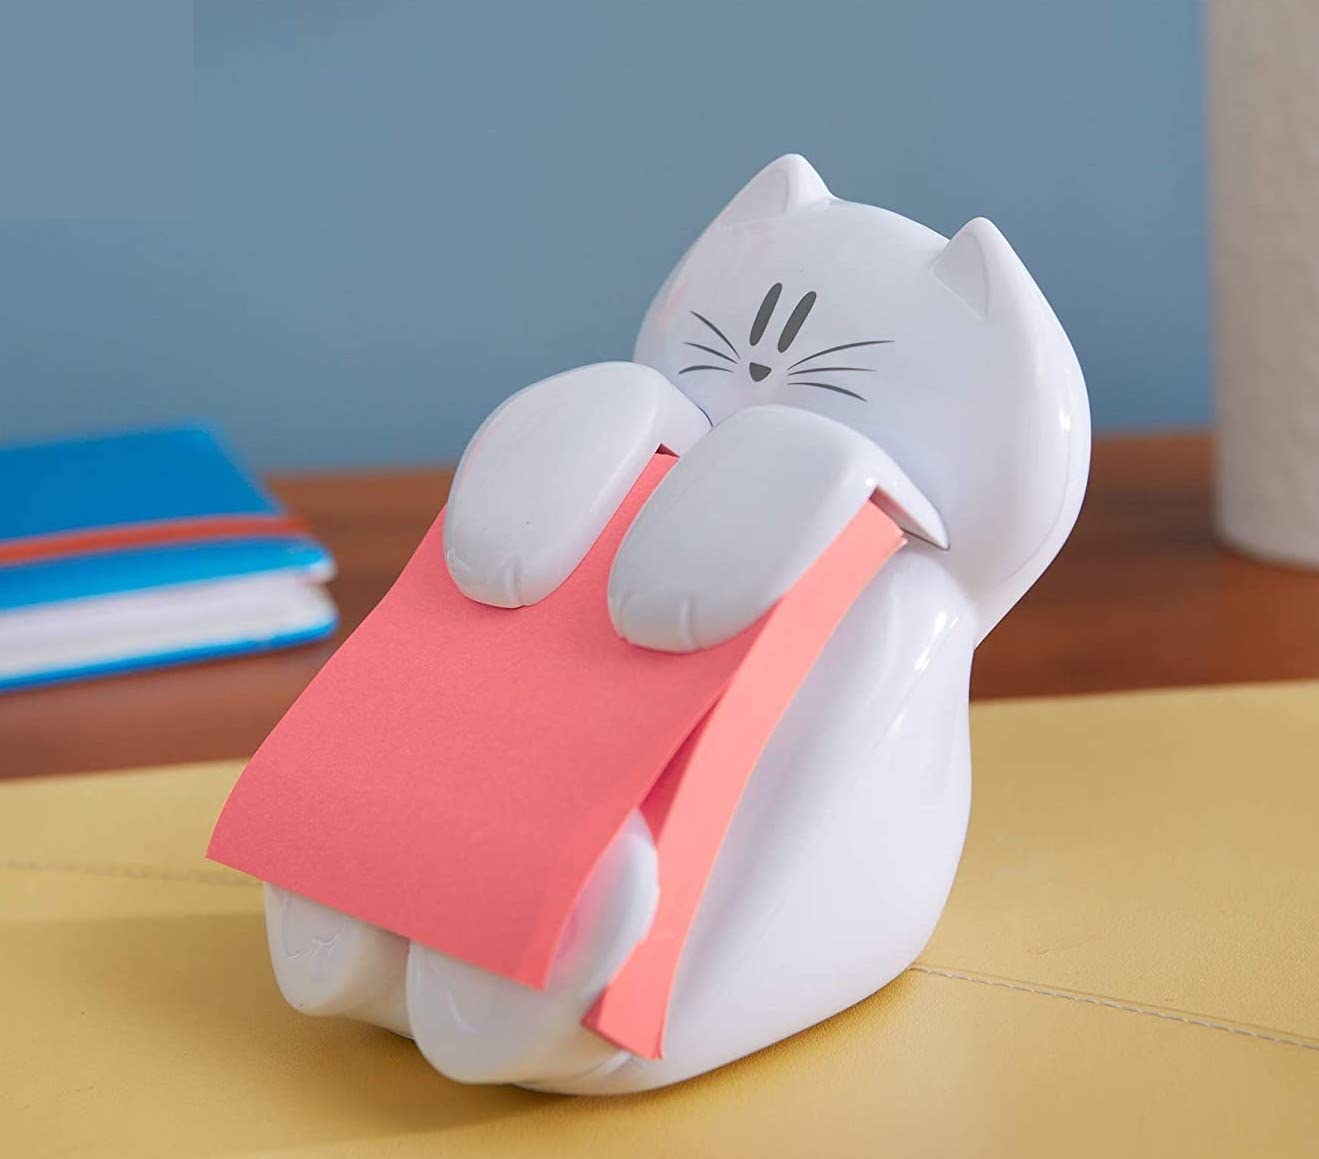 The post it holder is sitting on a desk with a whole pad of post its on it